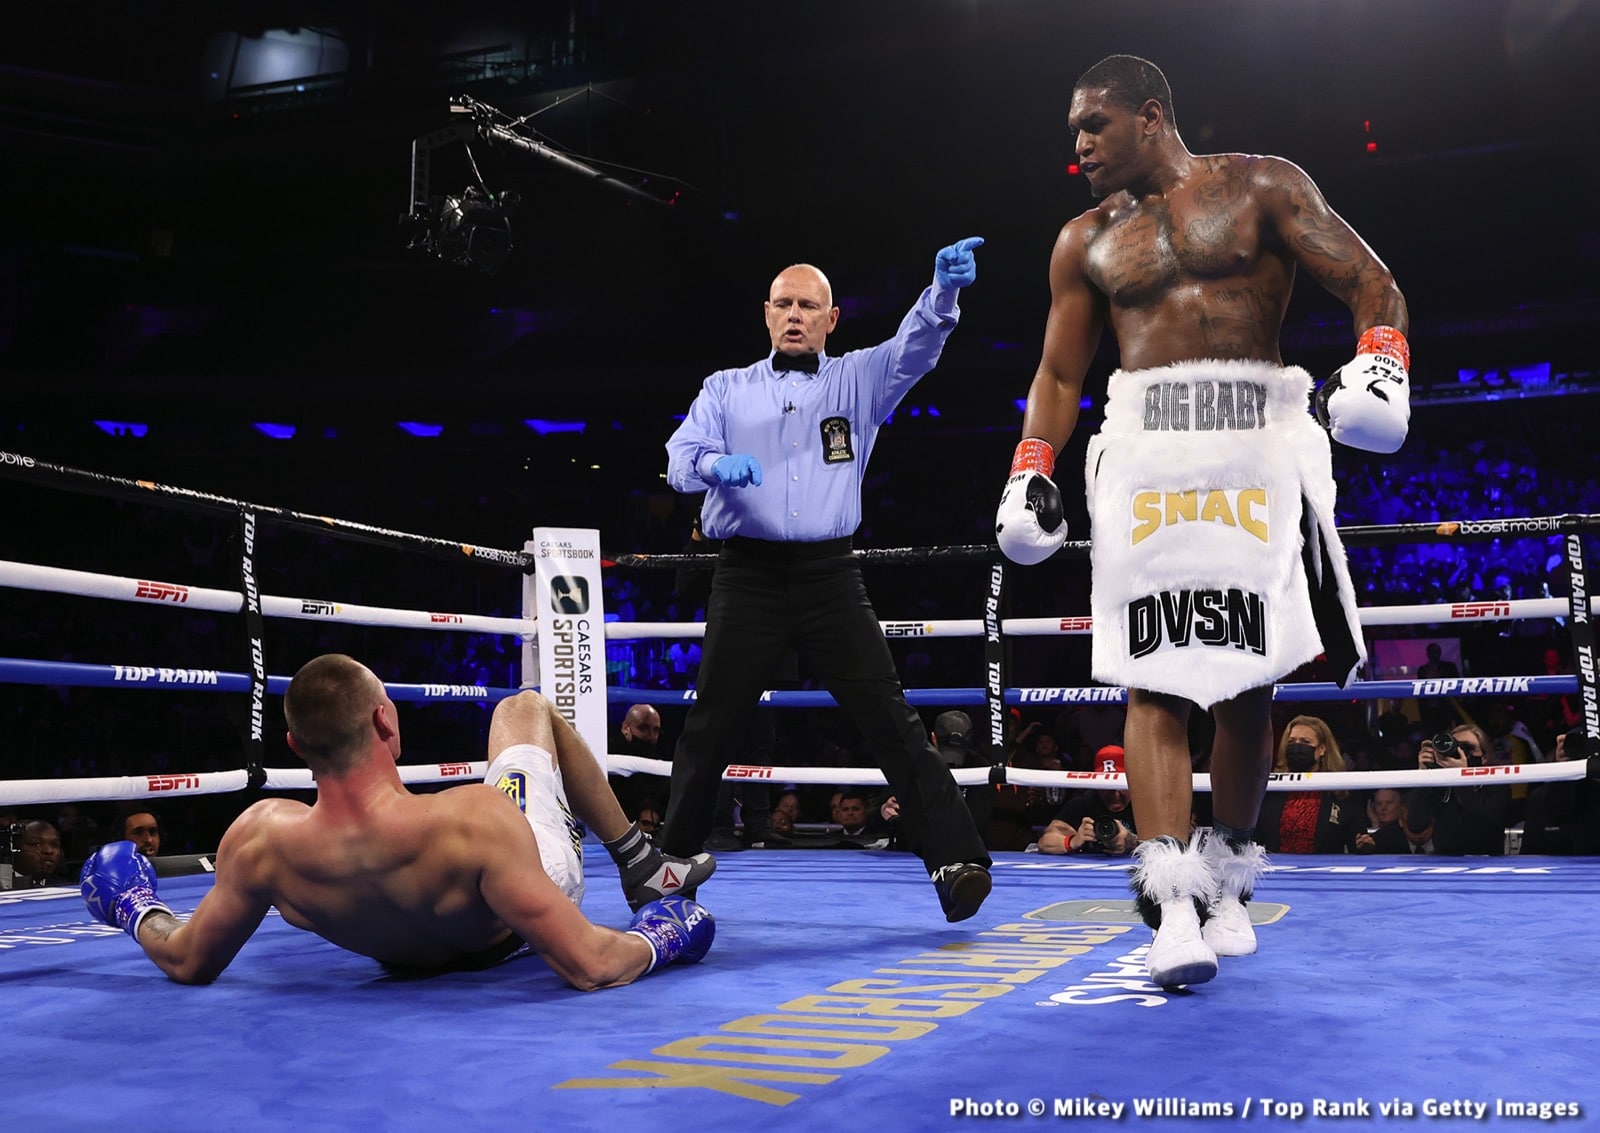 Deontay Wilder boxing photo and news image